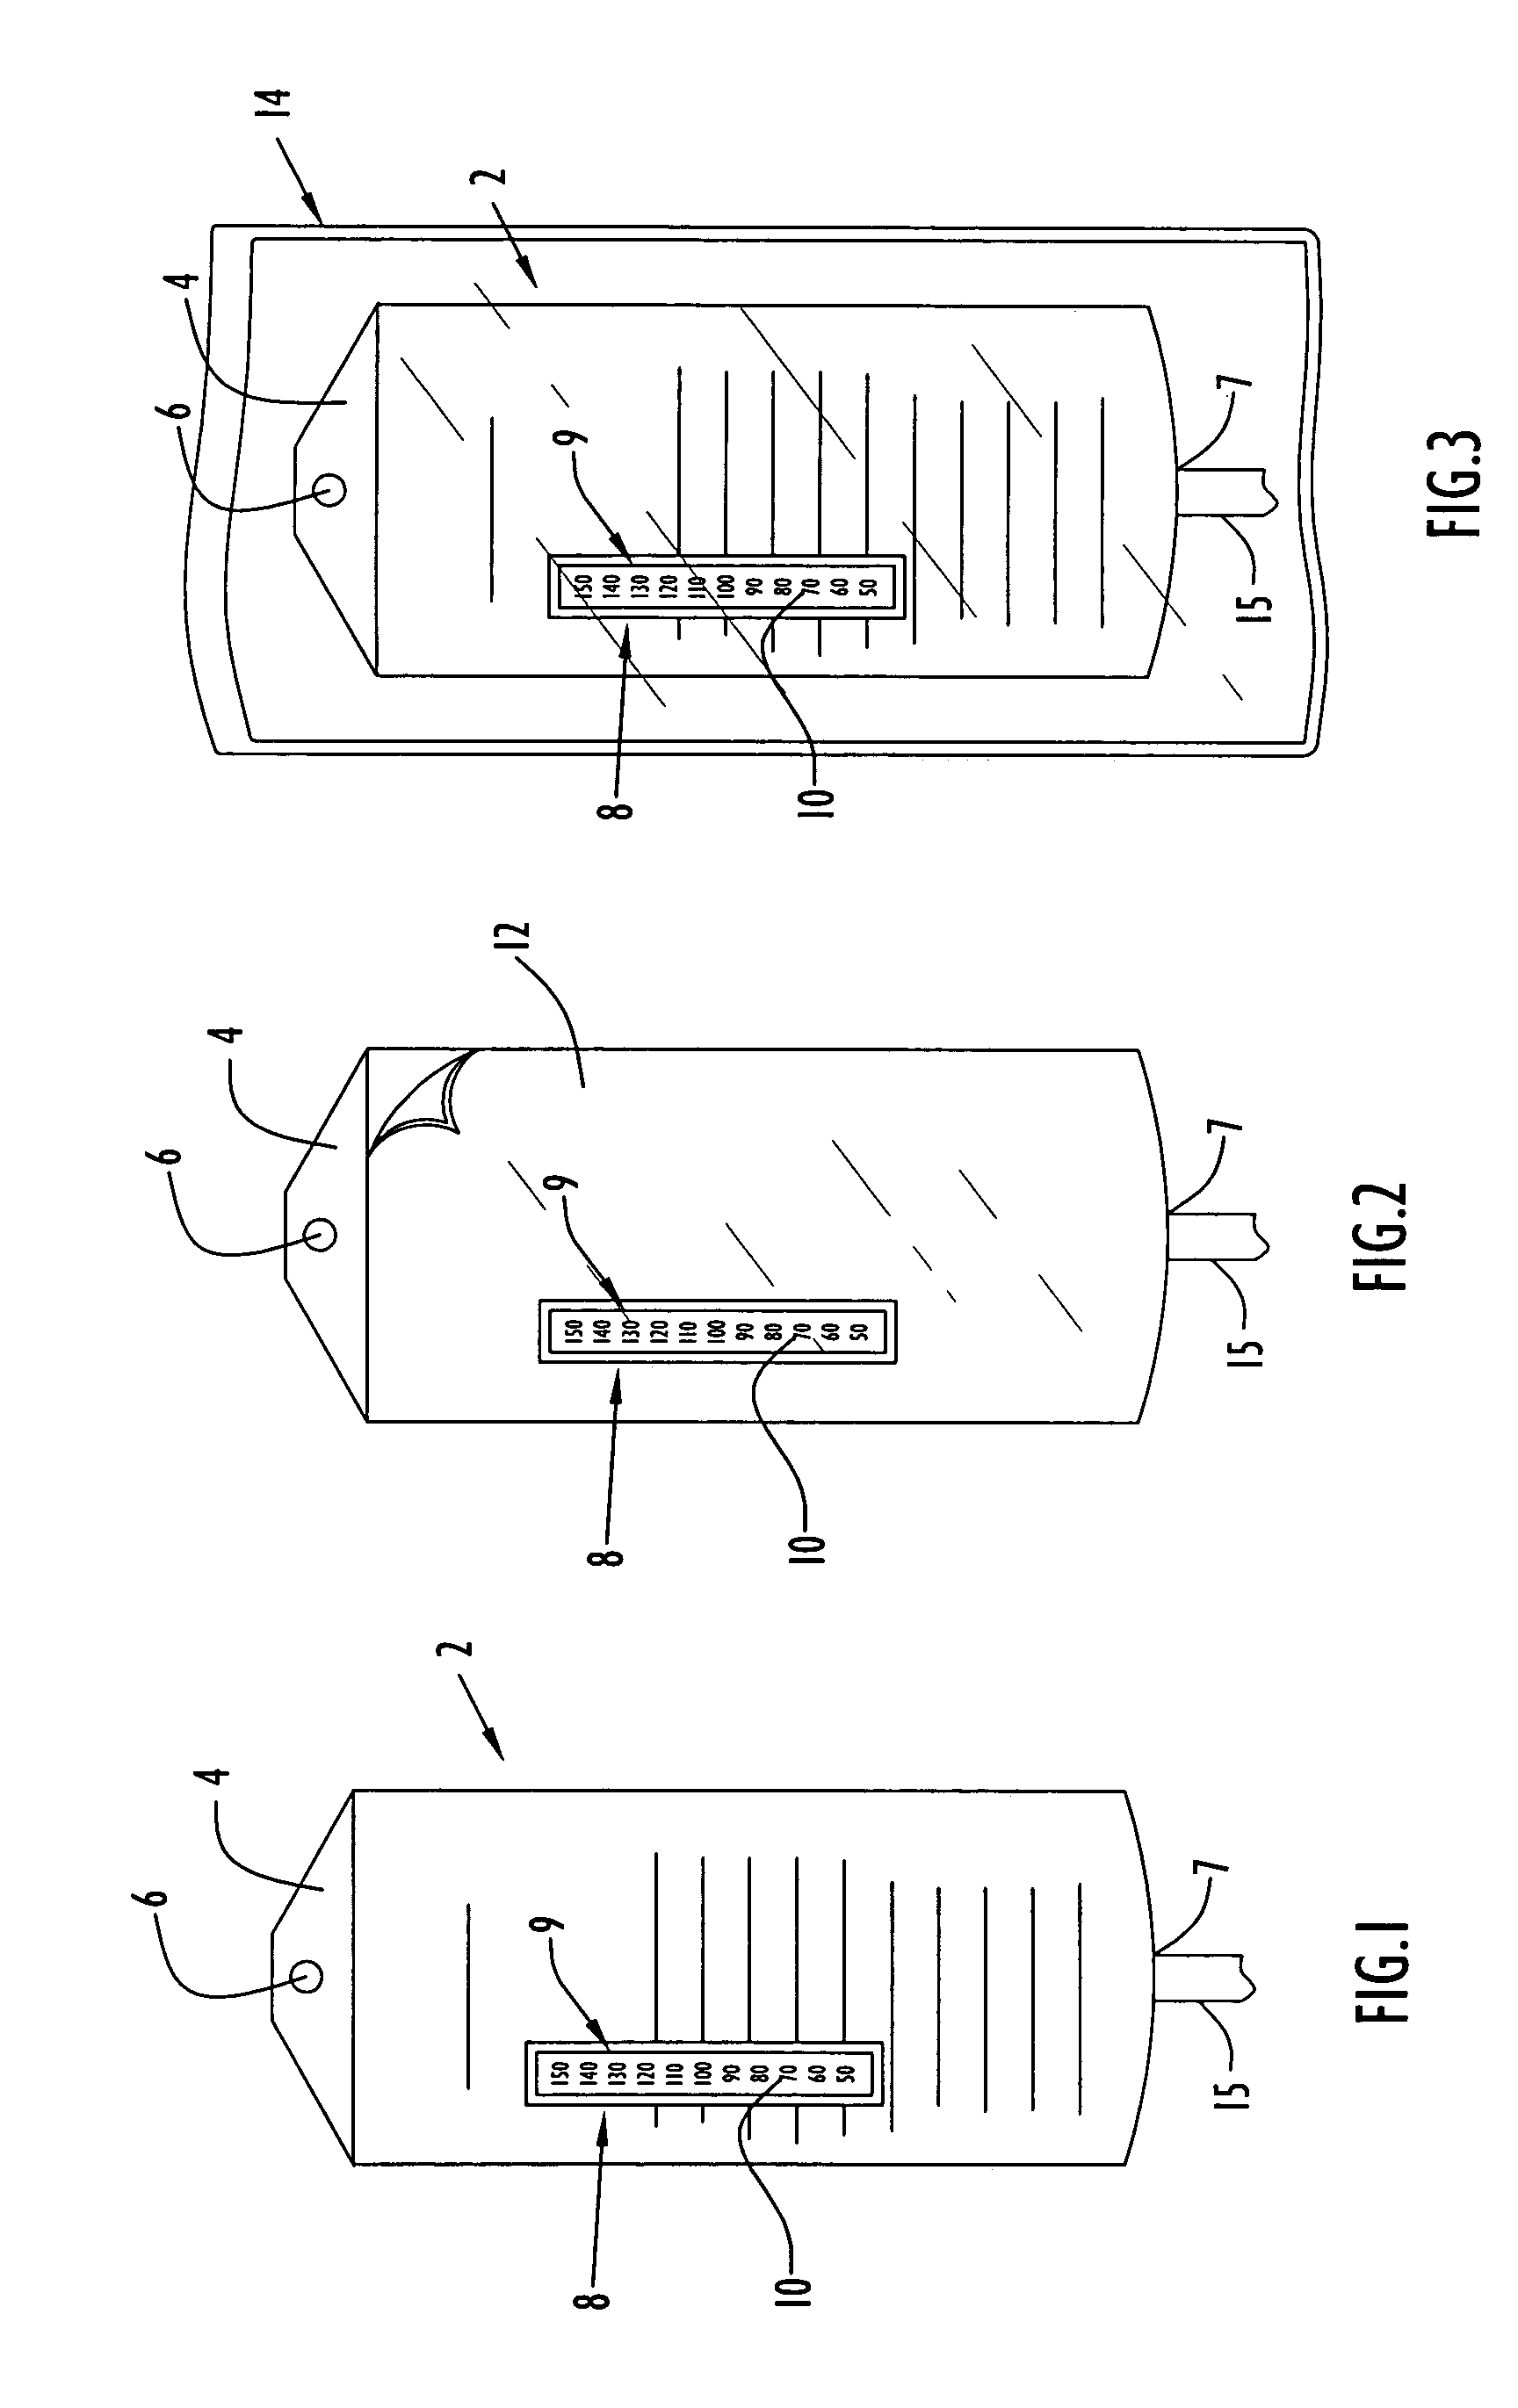 Method and apparatus for monitoring temperature of intravenously delivered fluids and other medical items